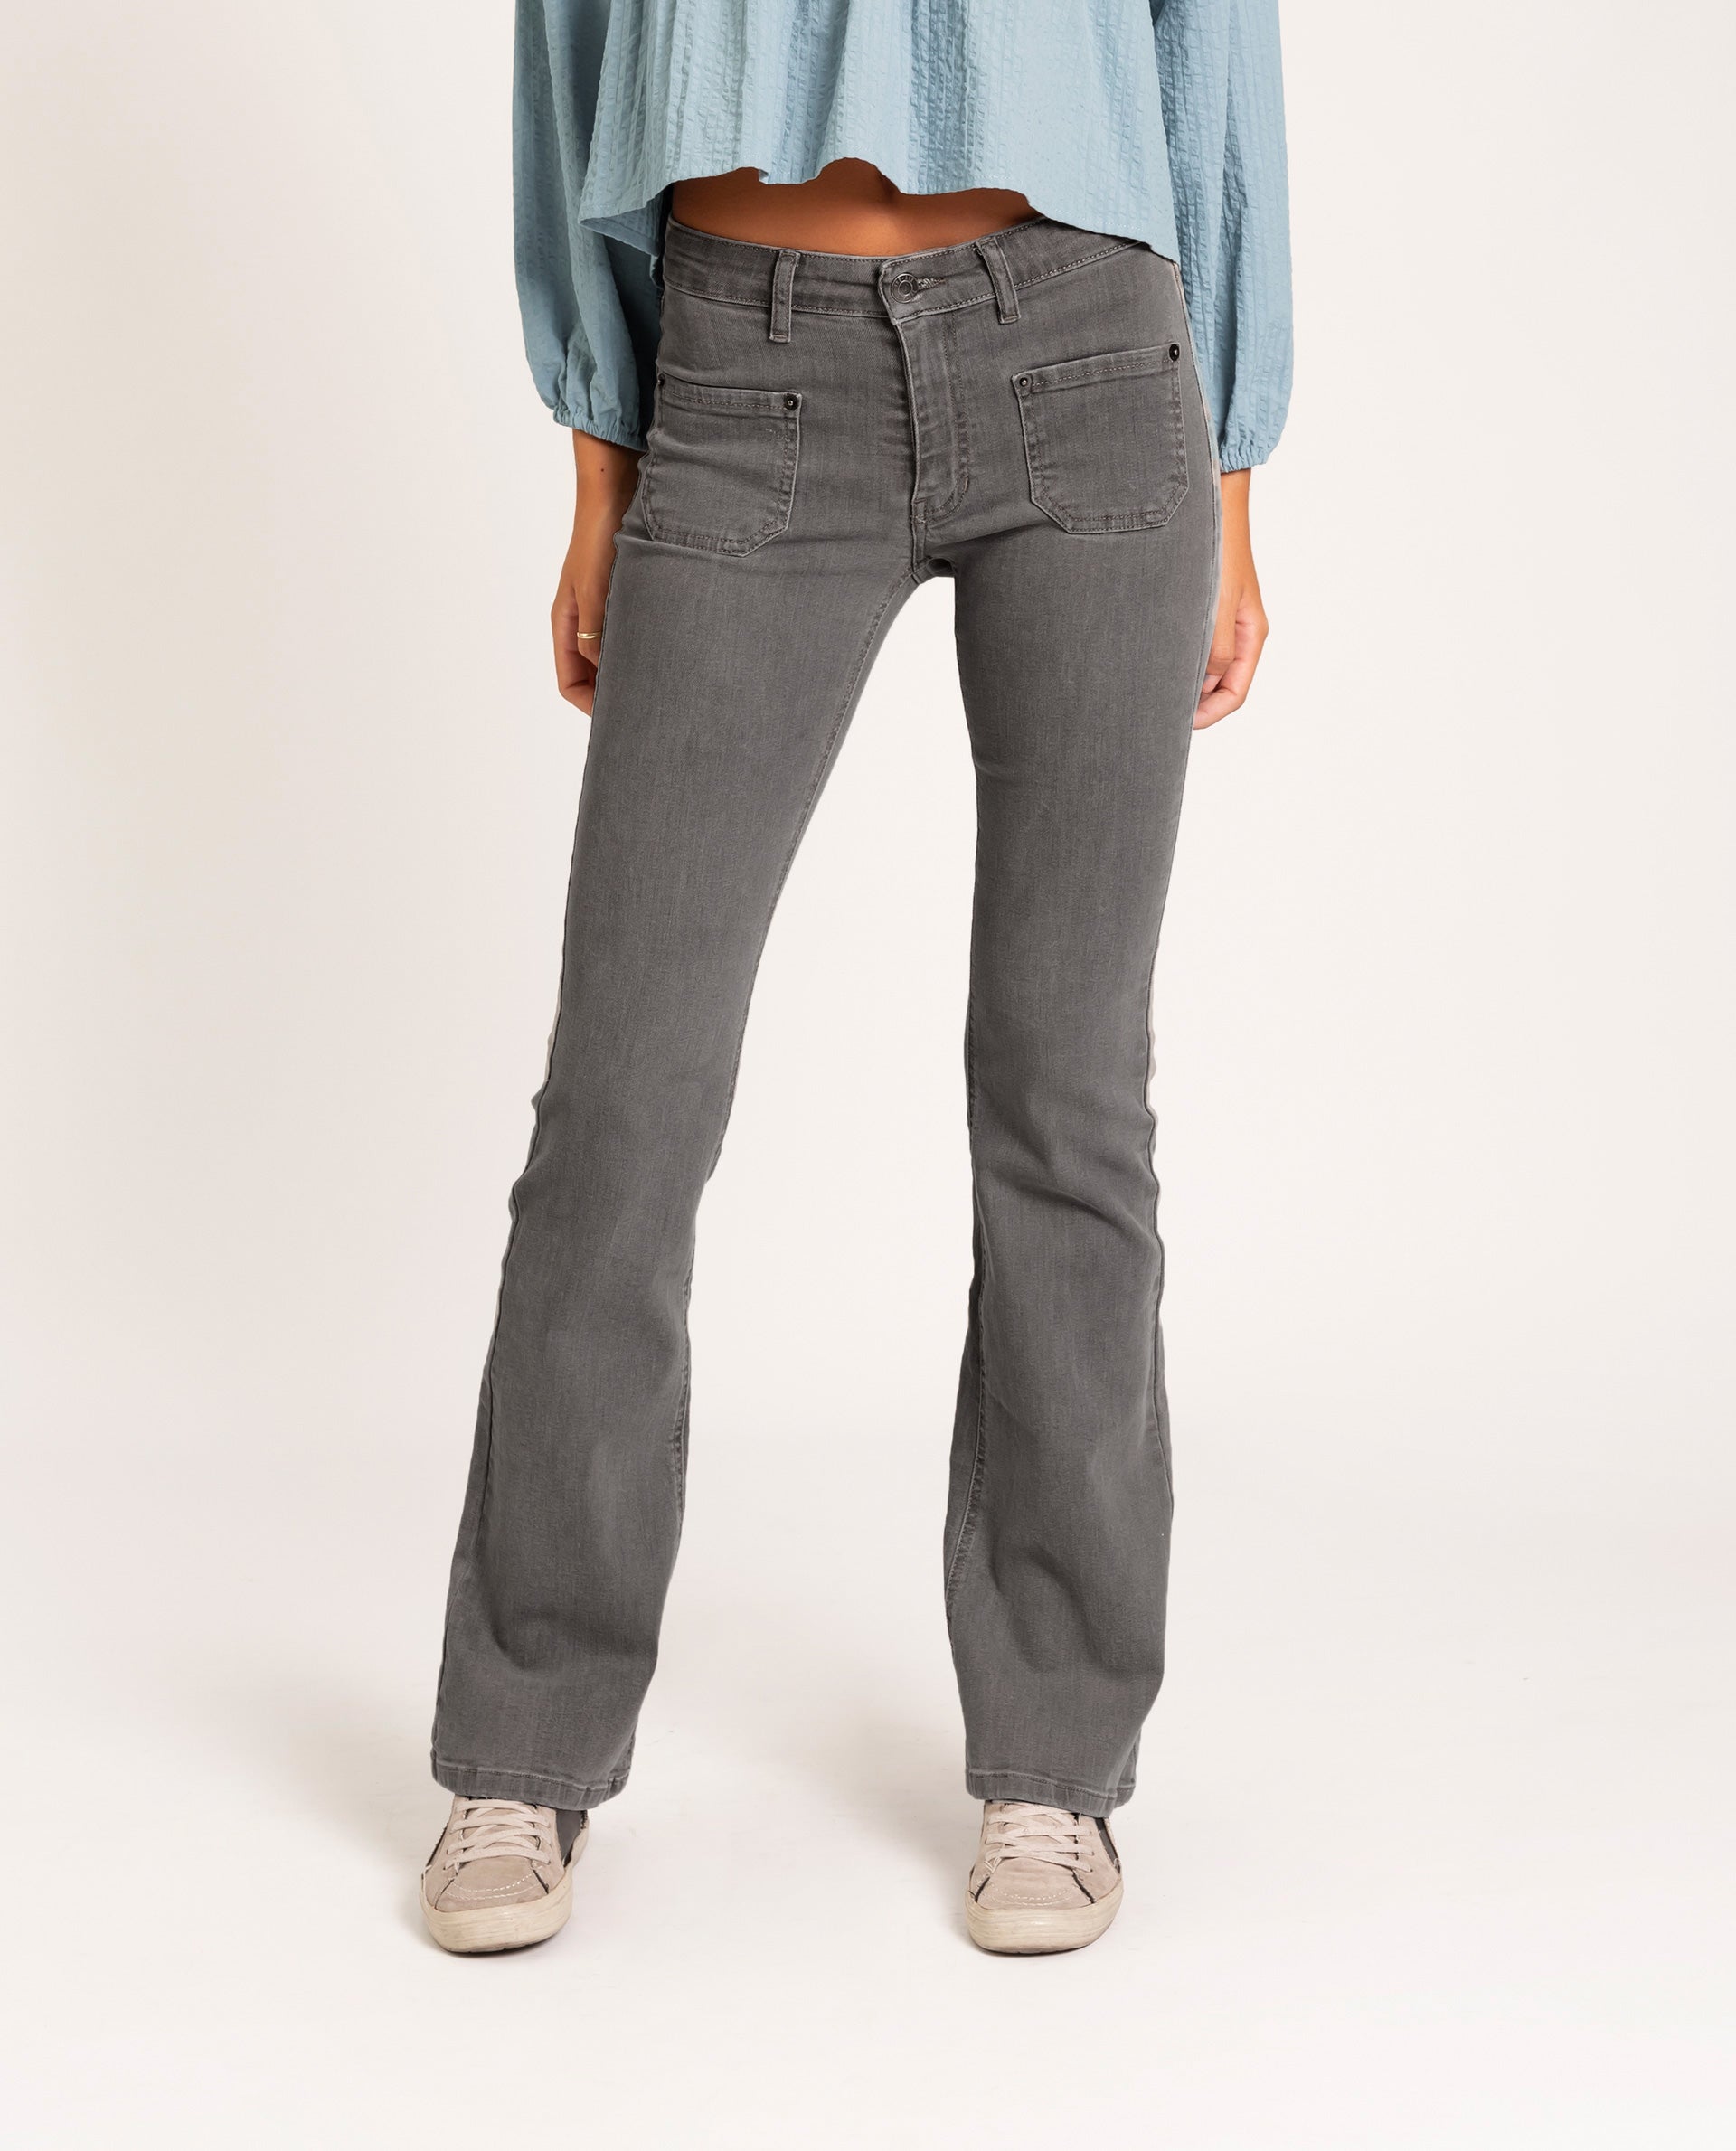 OFF ROAD JEANS - GRAY